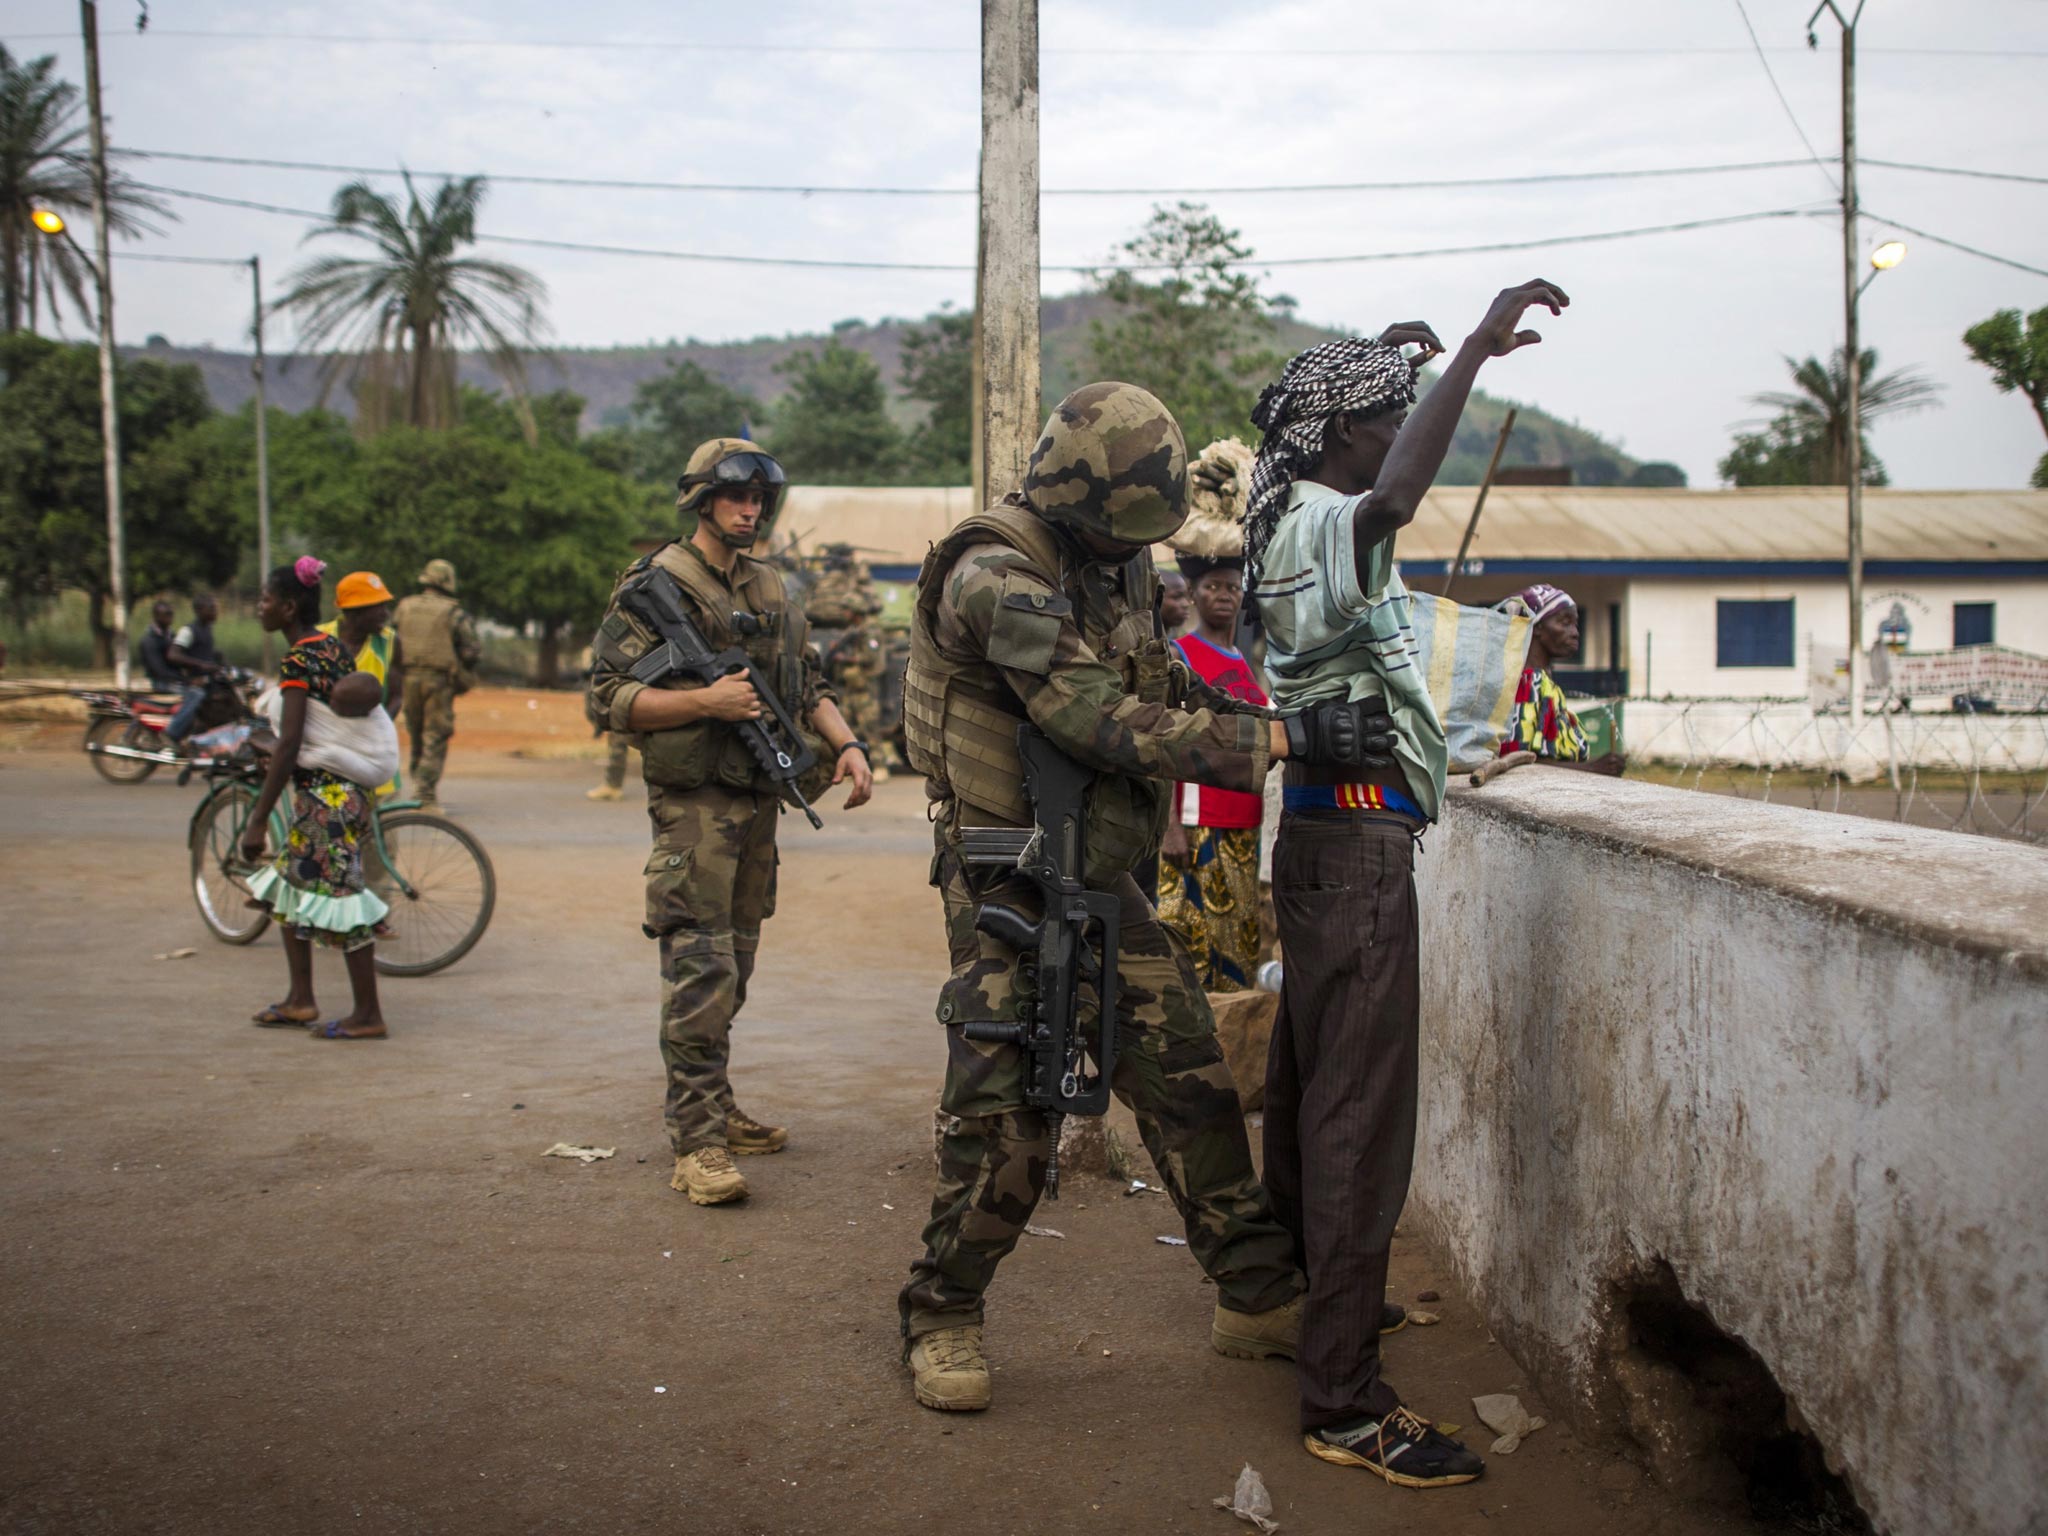 A French soldier frisks a man at a checkpoint in the PK12 district in
Bangui, as Operation Sangaris continues